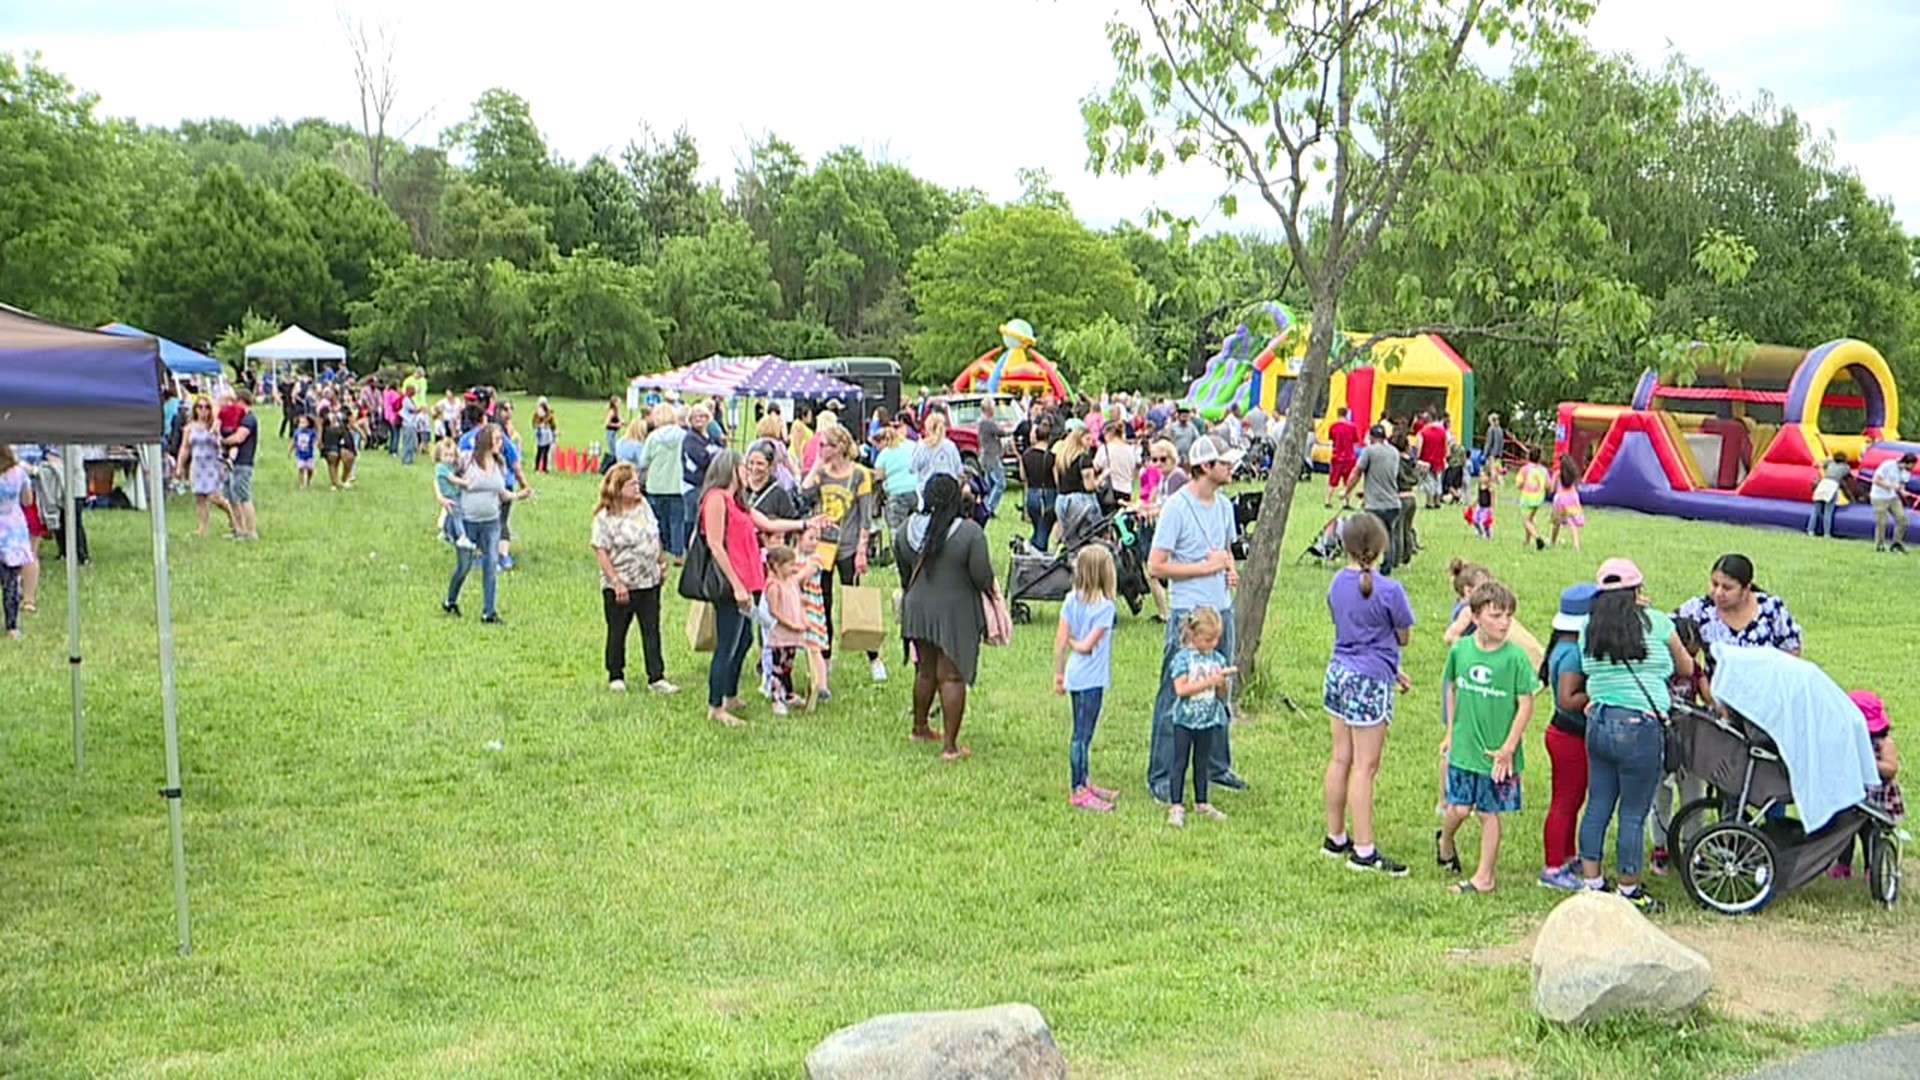 The Children's Advocacy Center of Northeastern Pennsylvania hosted their 9th Annual Carnival for Kids at McDade Park in Scranton.